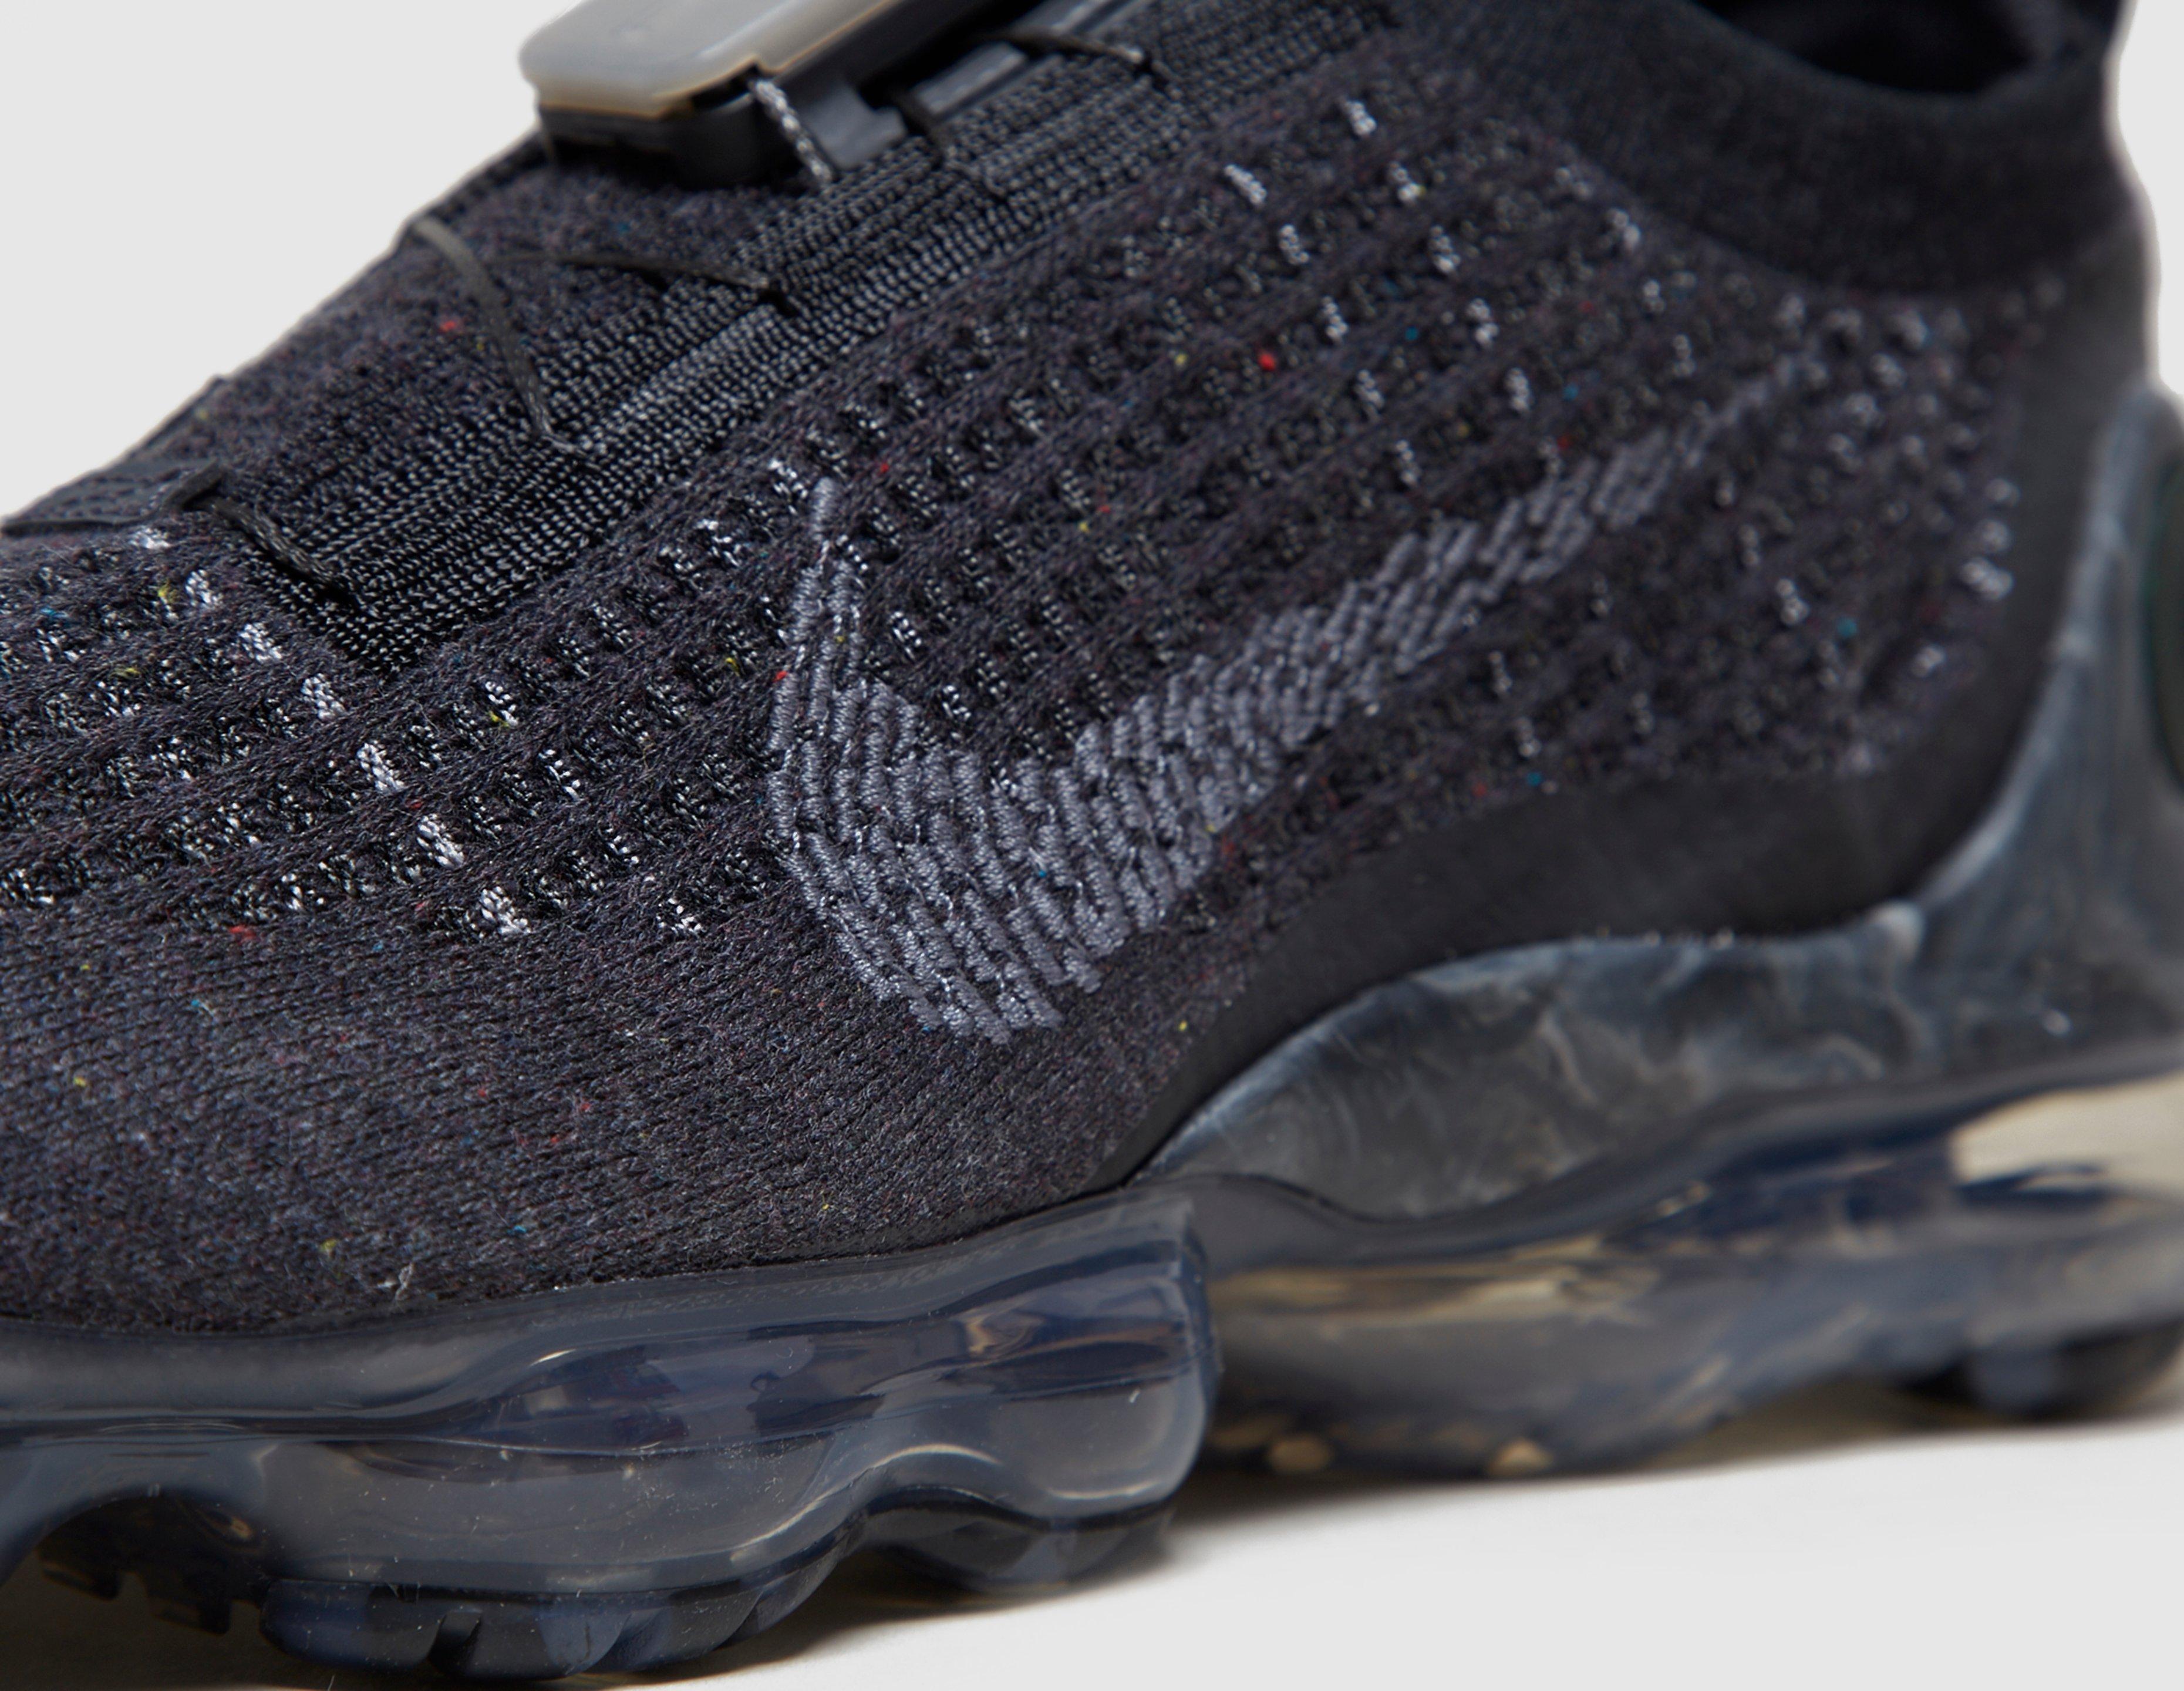 Nike Debuts New Sustainable VaporMax 2020 for Pinterest